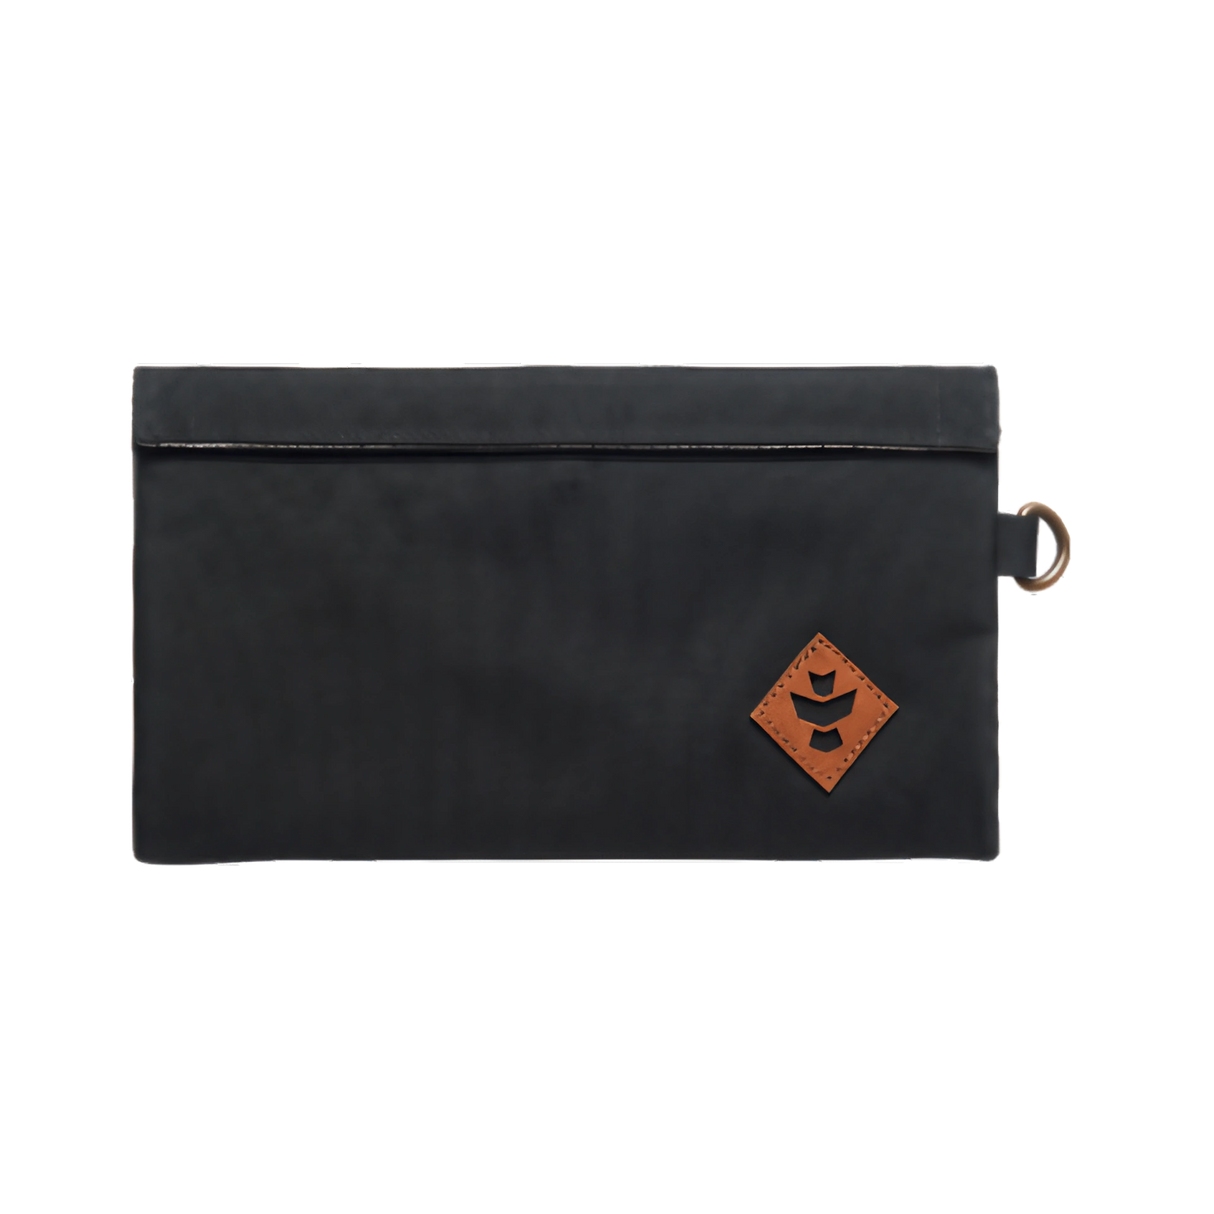 Revelry Supply Confidant black silicone pouch front view with logo